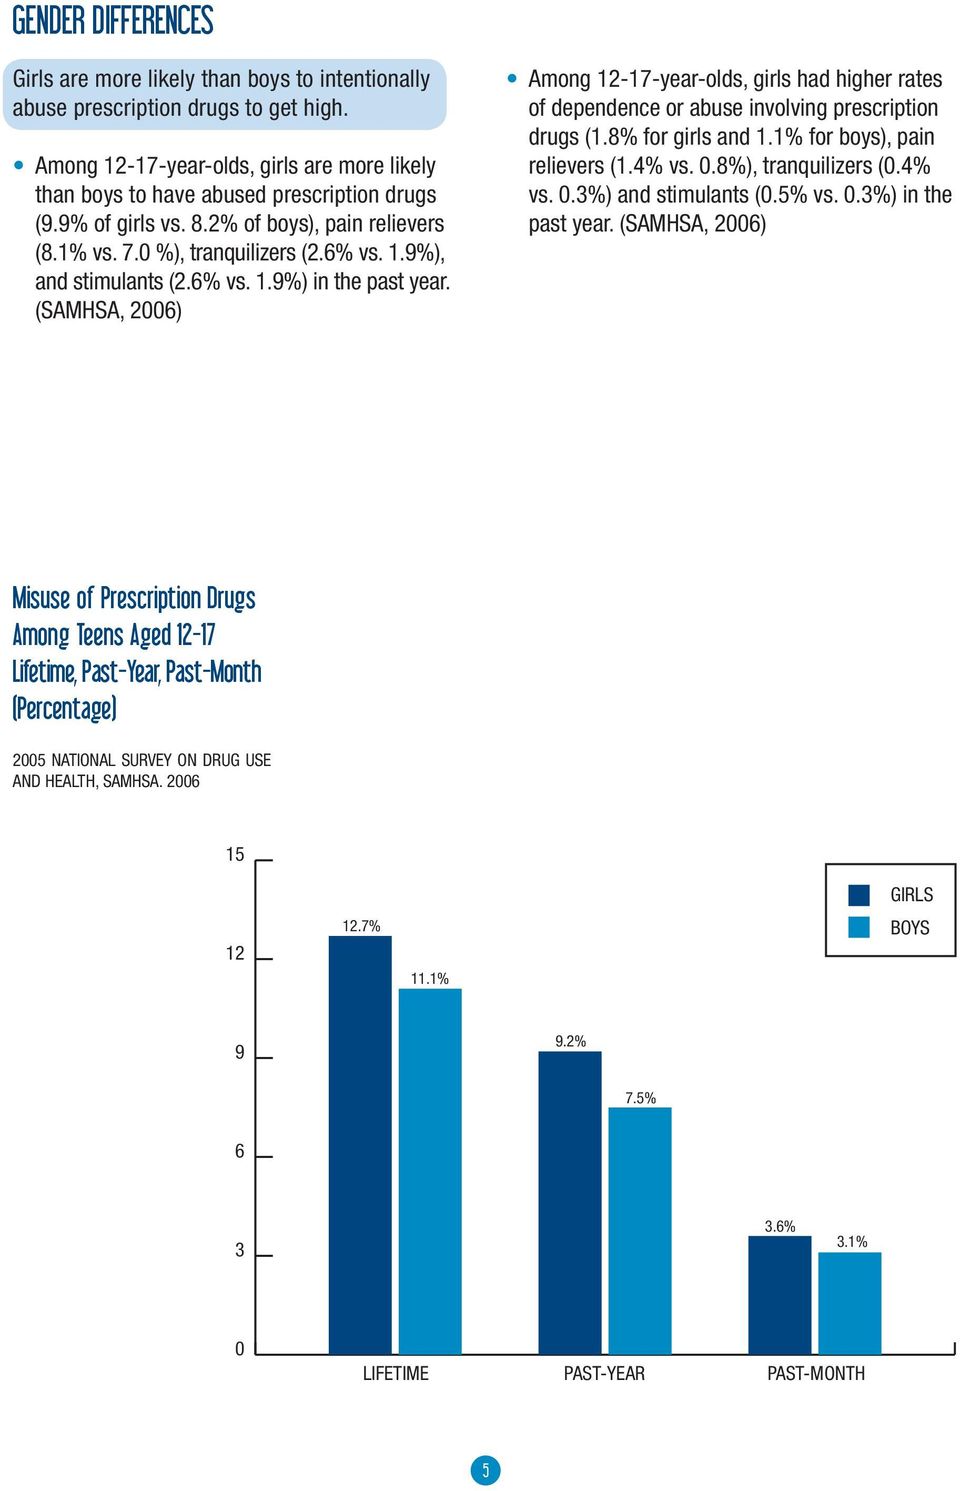 (SAMHSA, 2006) Among 12-17-year-olds, girls had higher rates of dependence or abuse involving prescription drugs (1.8% for girls and 1.1% for boys), pain relievers (1.4% vs. 0.8%), tranquilizers (0.